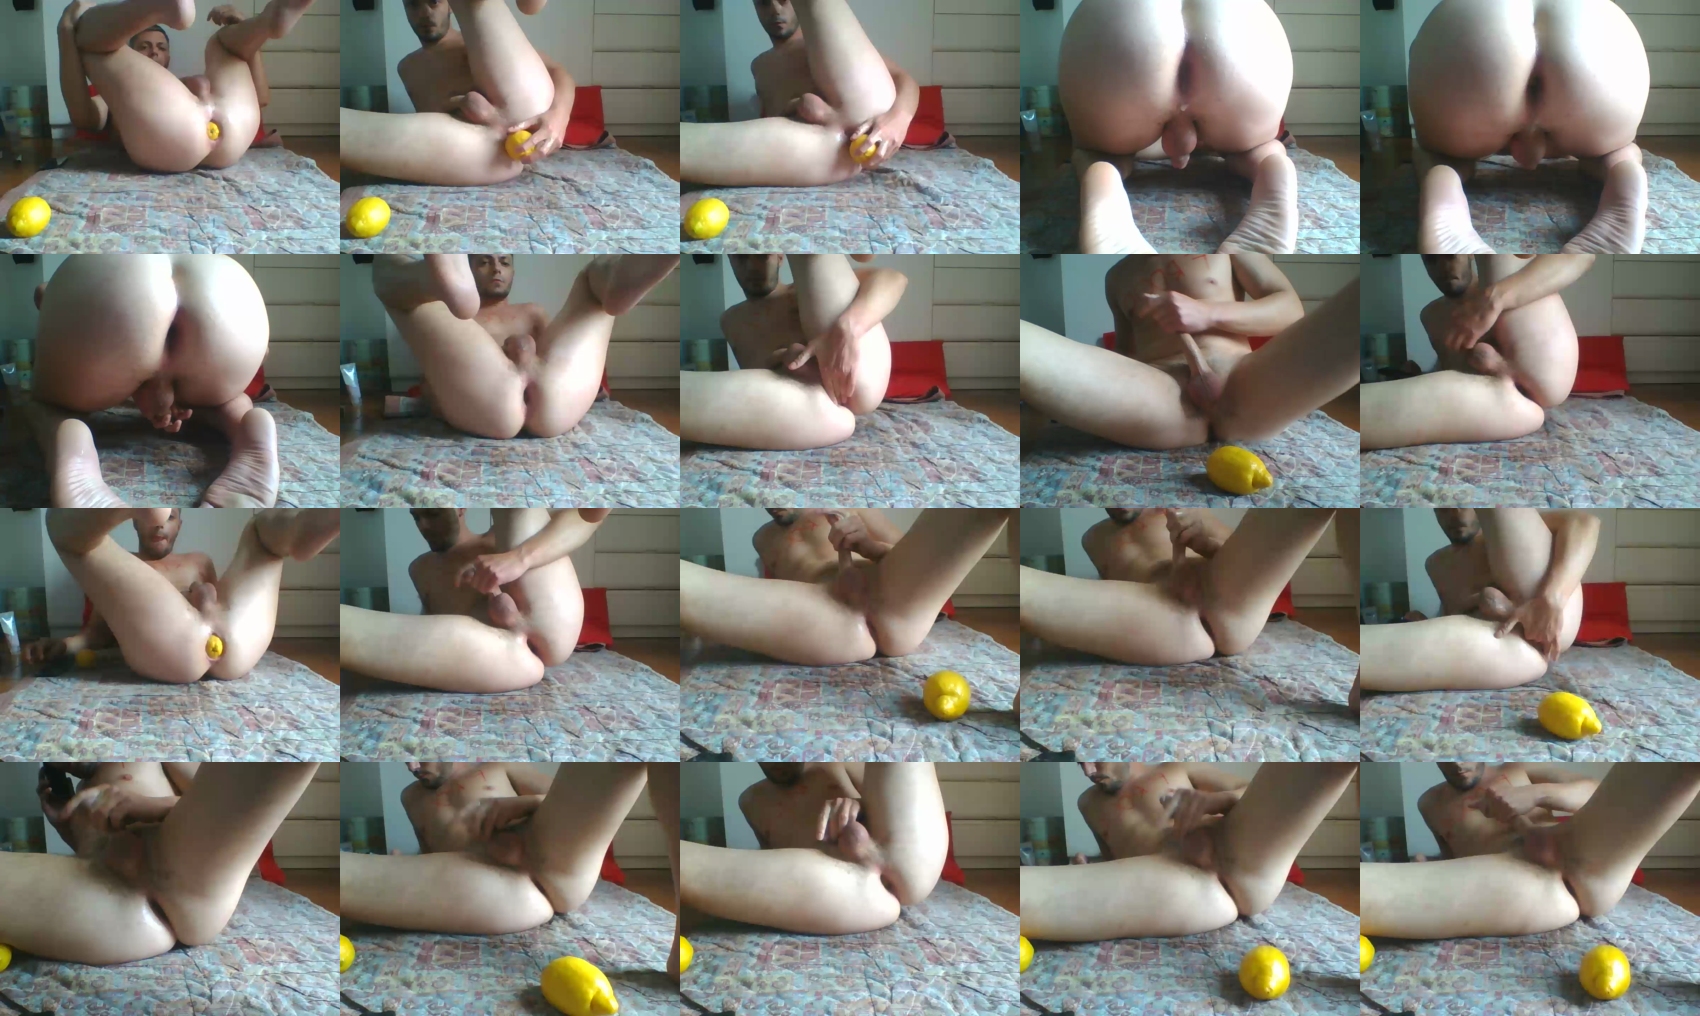 extremeanal  31-05-2022 Recorded Video strip